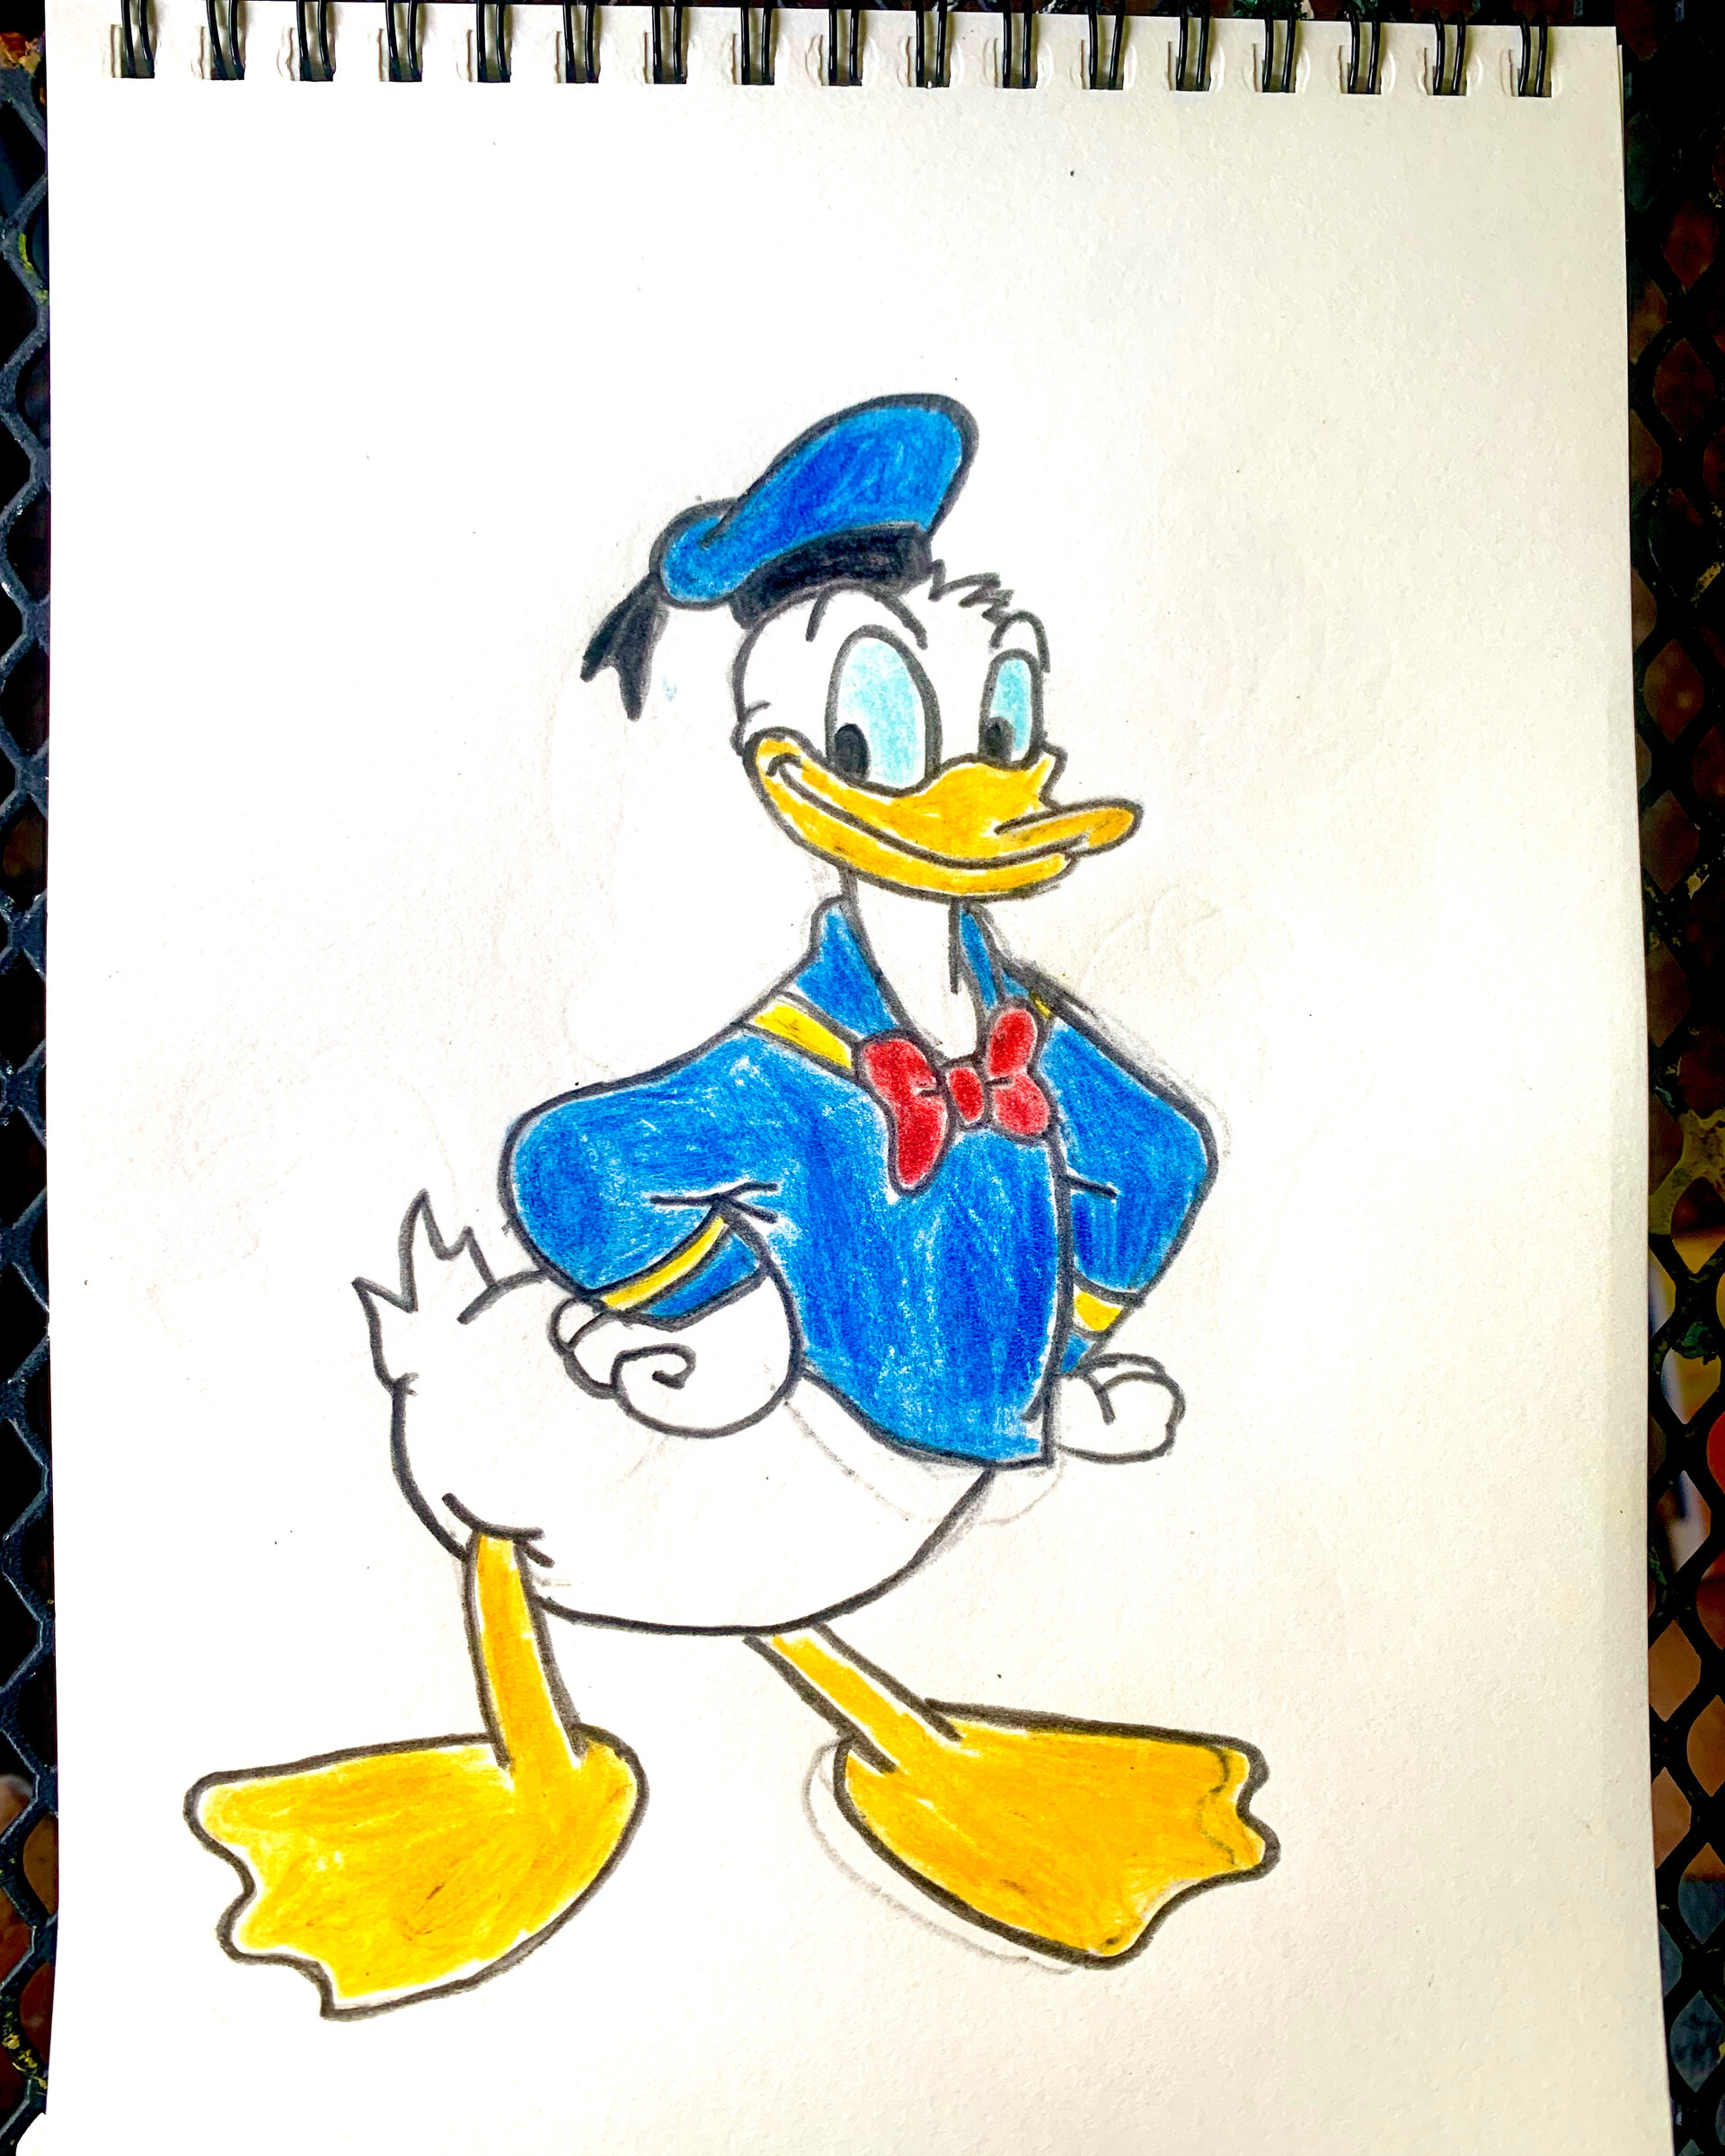 How To Draw Donald Duck, Step by Step, Drawing Guide, by Dawn - DragoArt